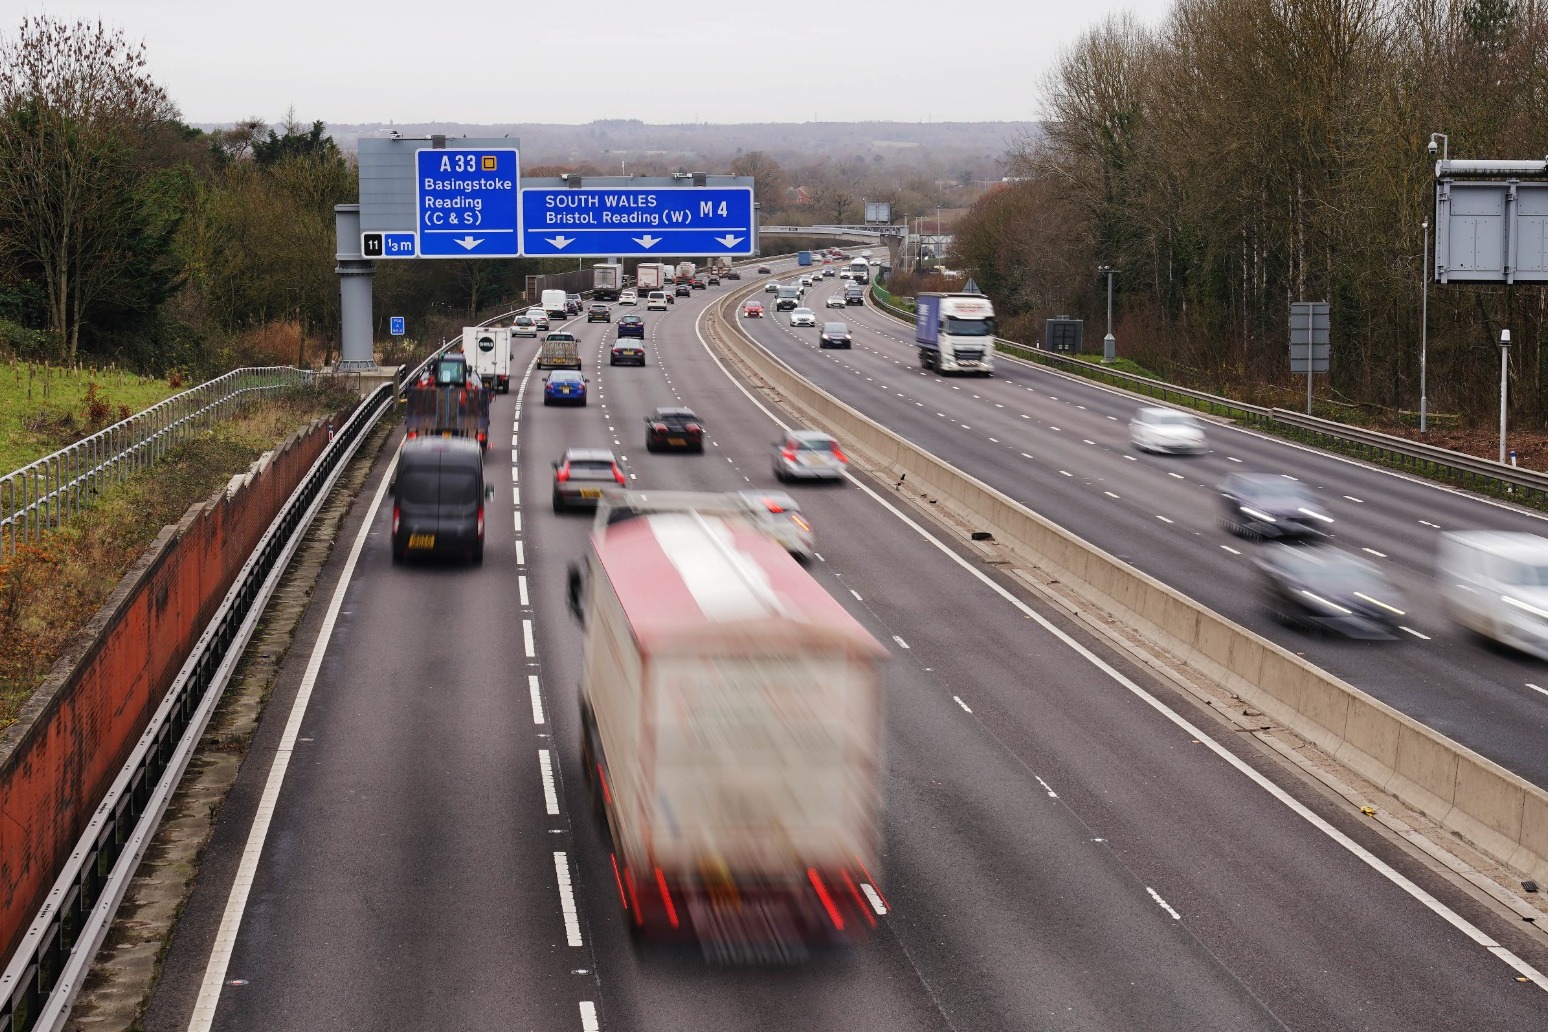 Man arrested for driving 180mph on M4 